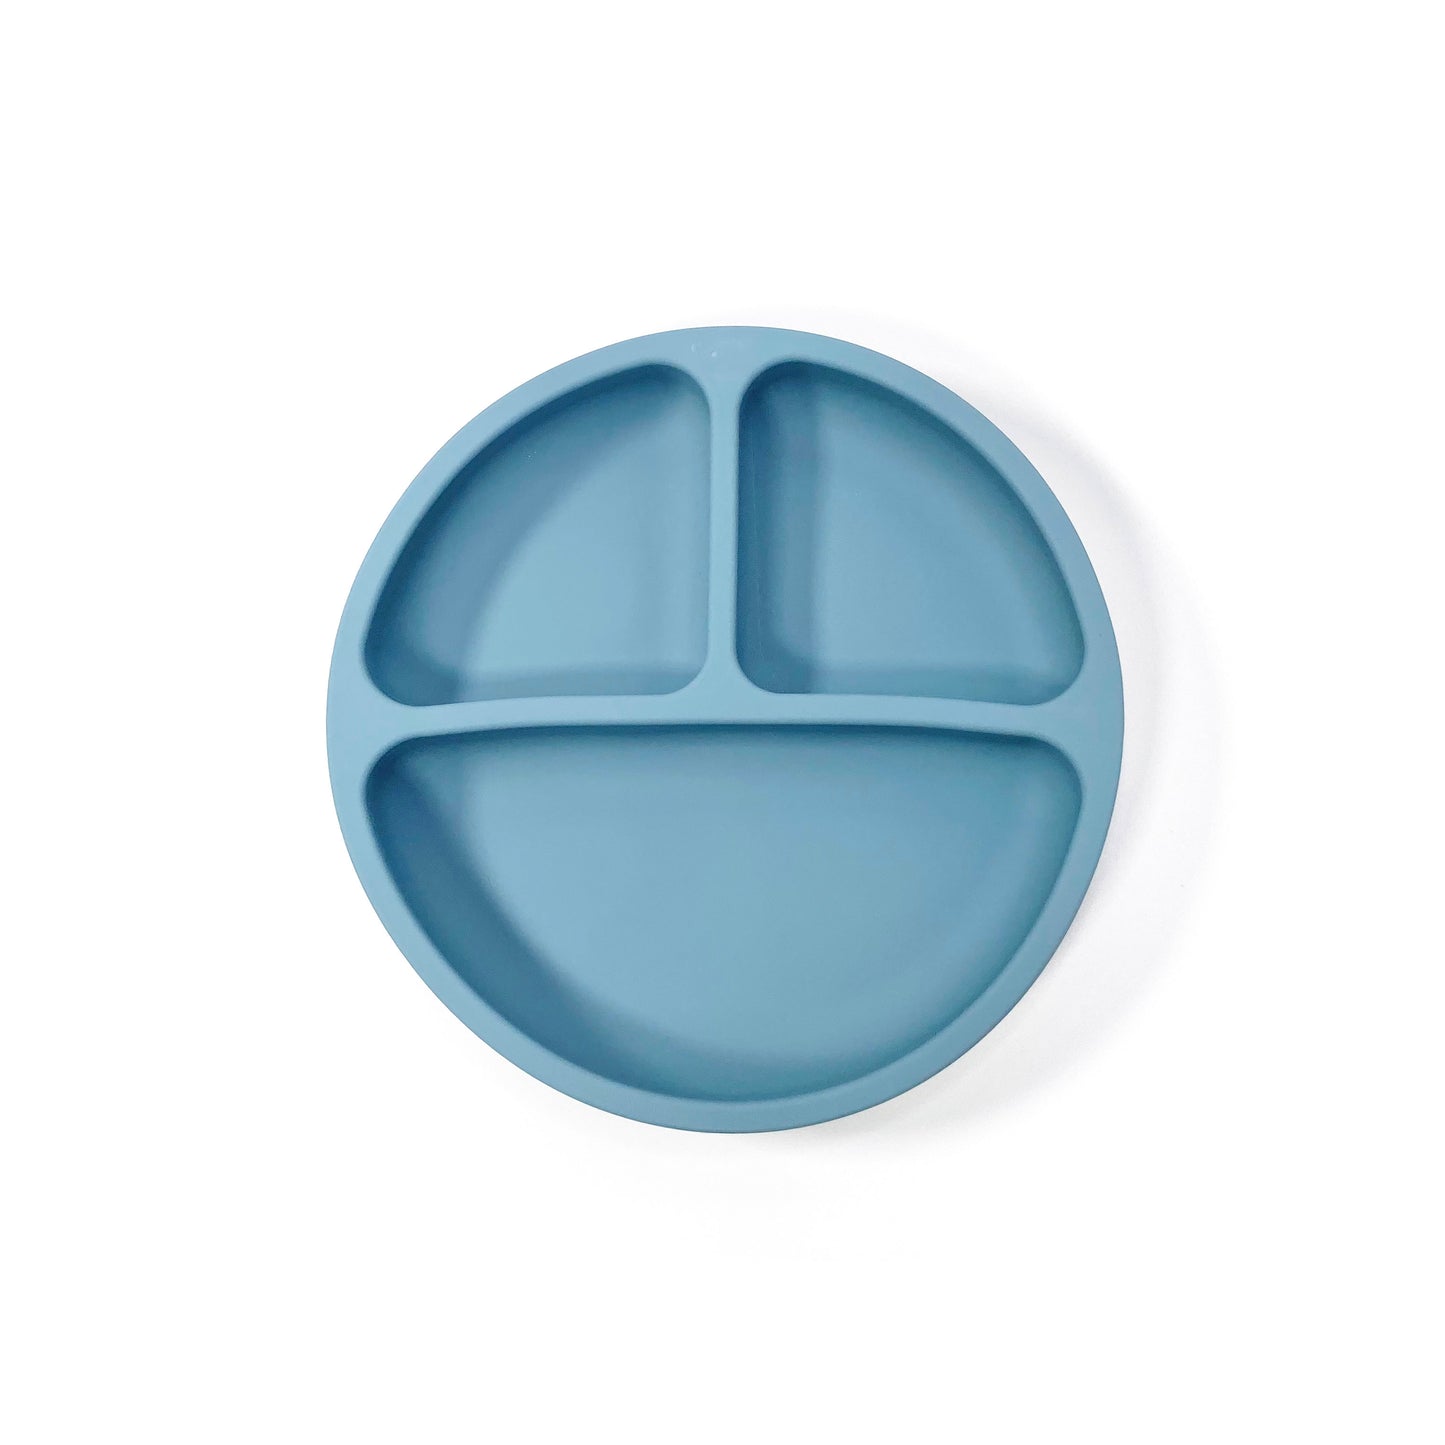 An ocean blue silicone children’s section plate with suction cups on the base. View from above.